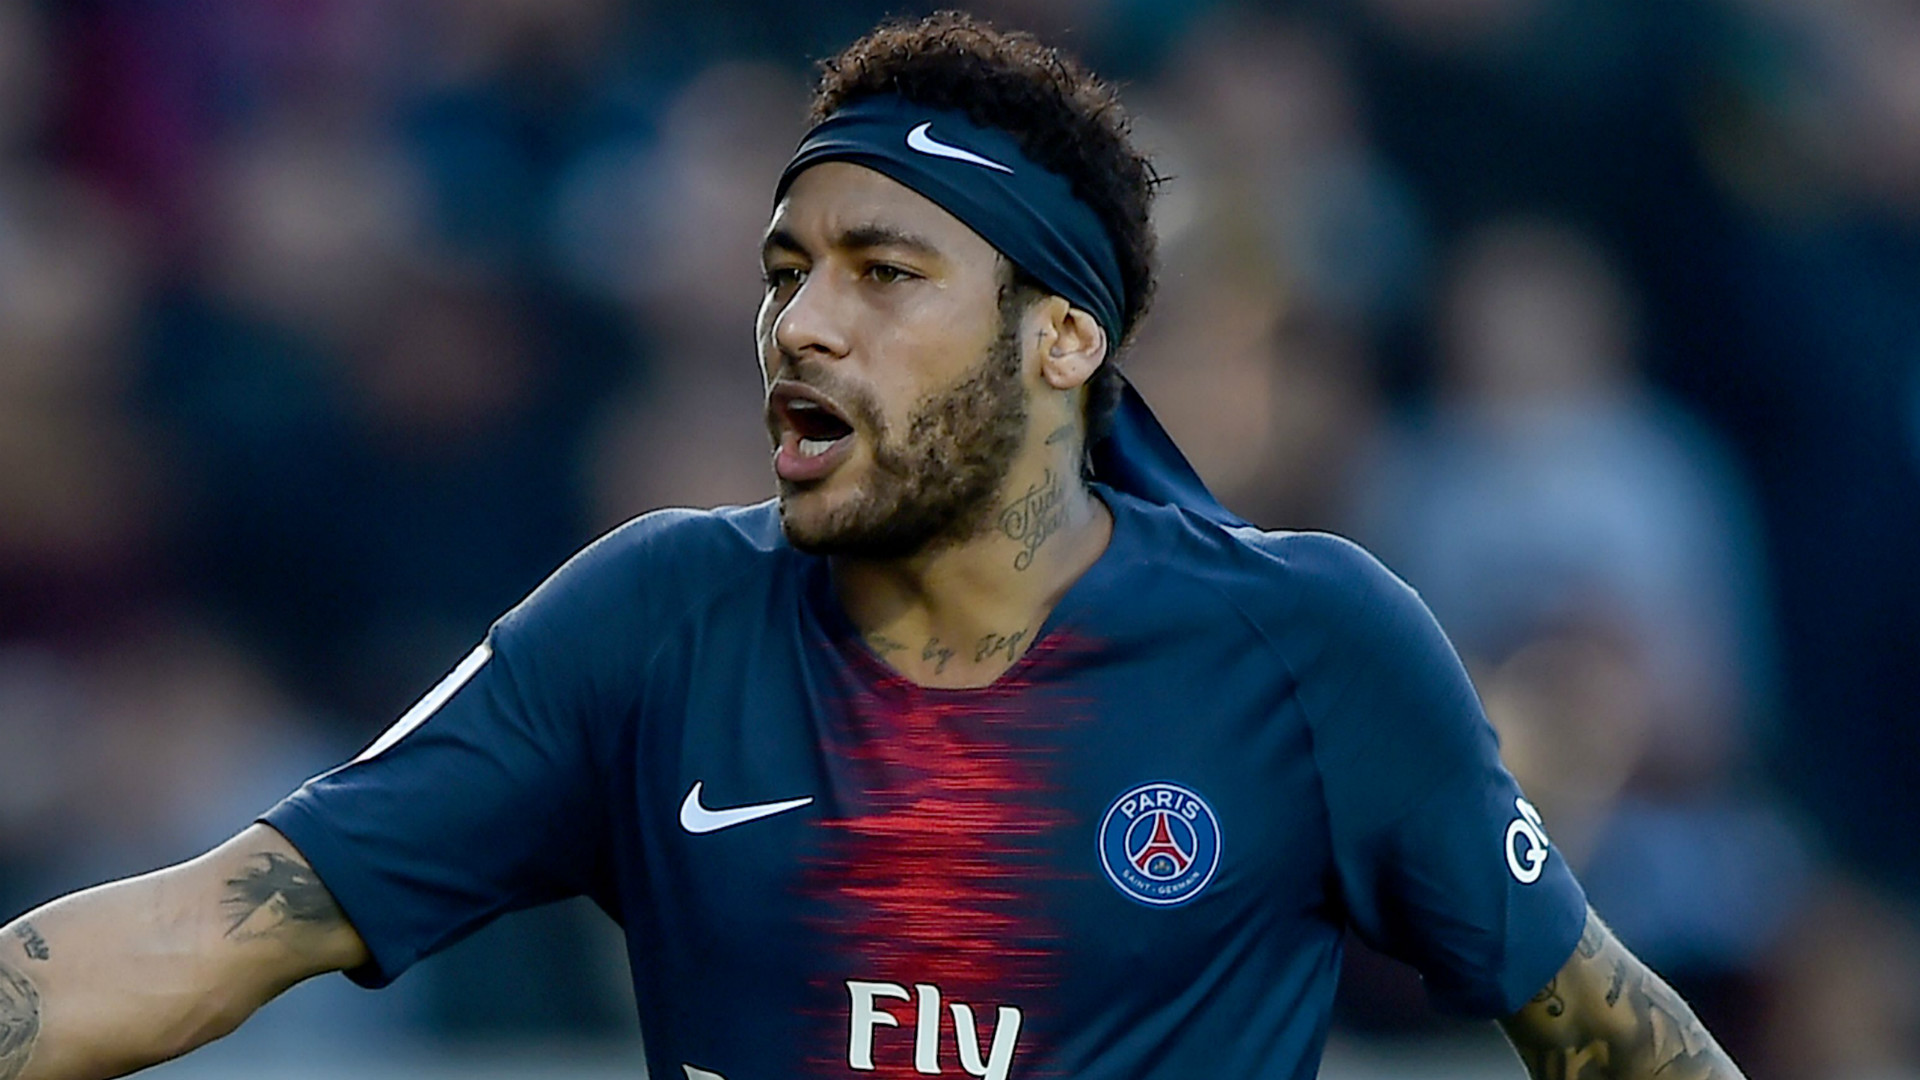 Paris Saint-Germain star Neymar apparently lost €1 million playing online poker on Thursday, with the Brazilian left fake crying on a live stream.